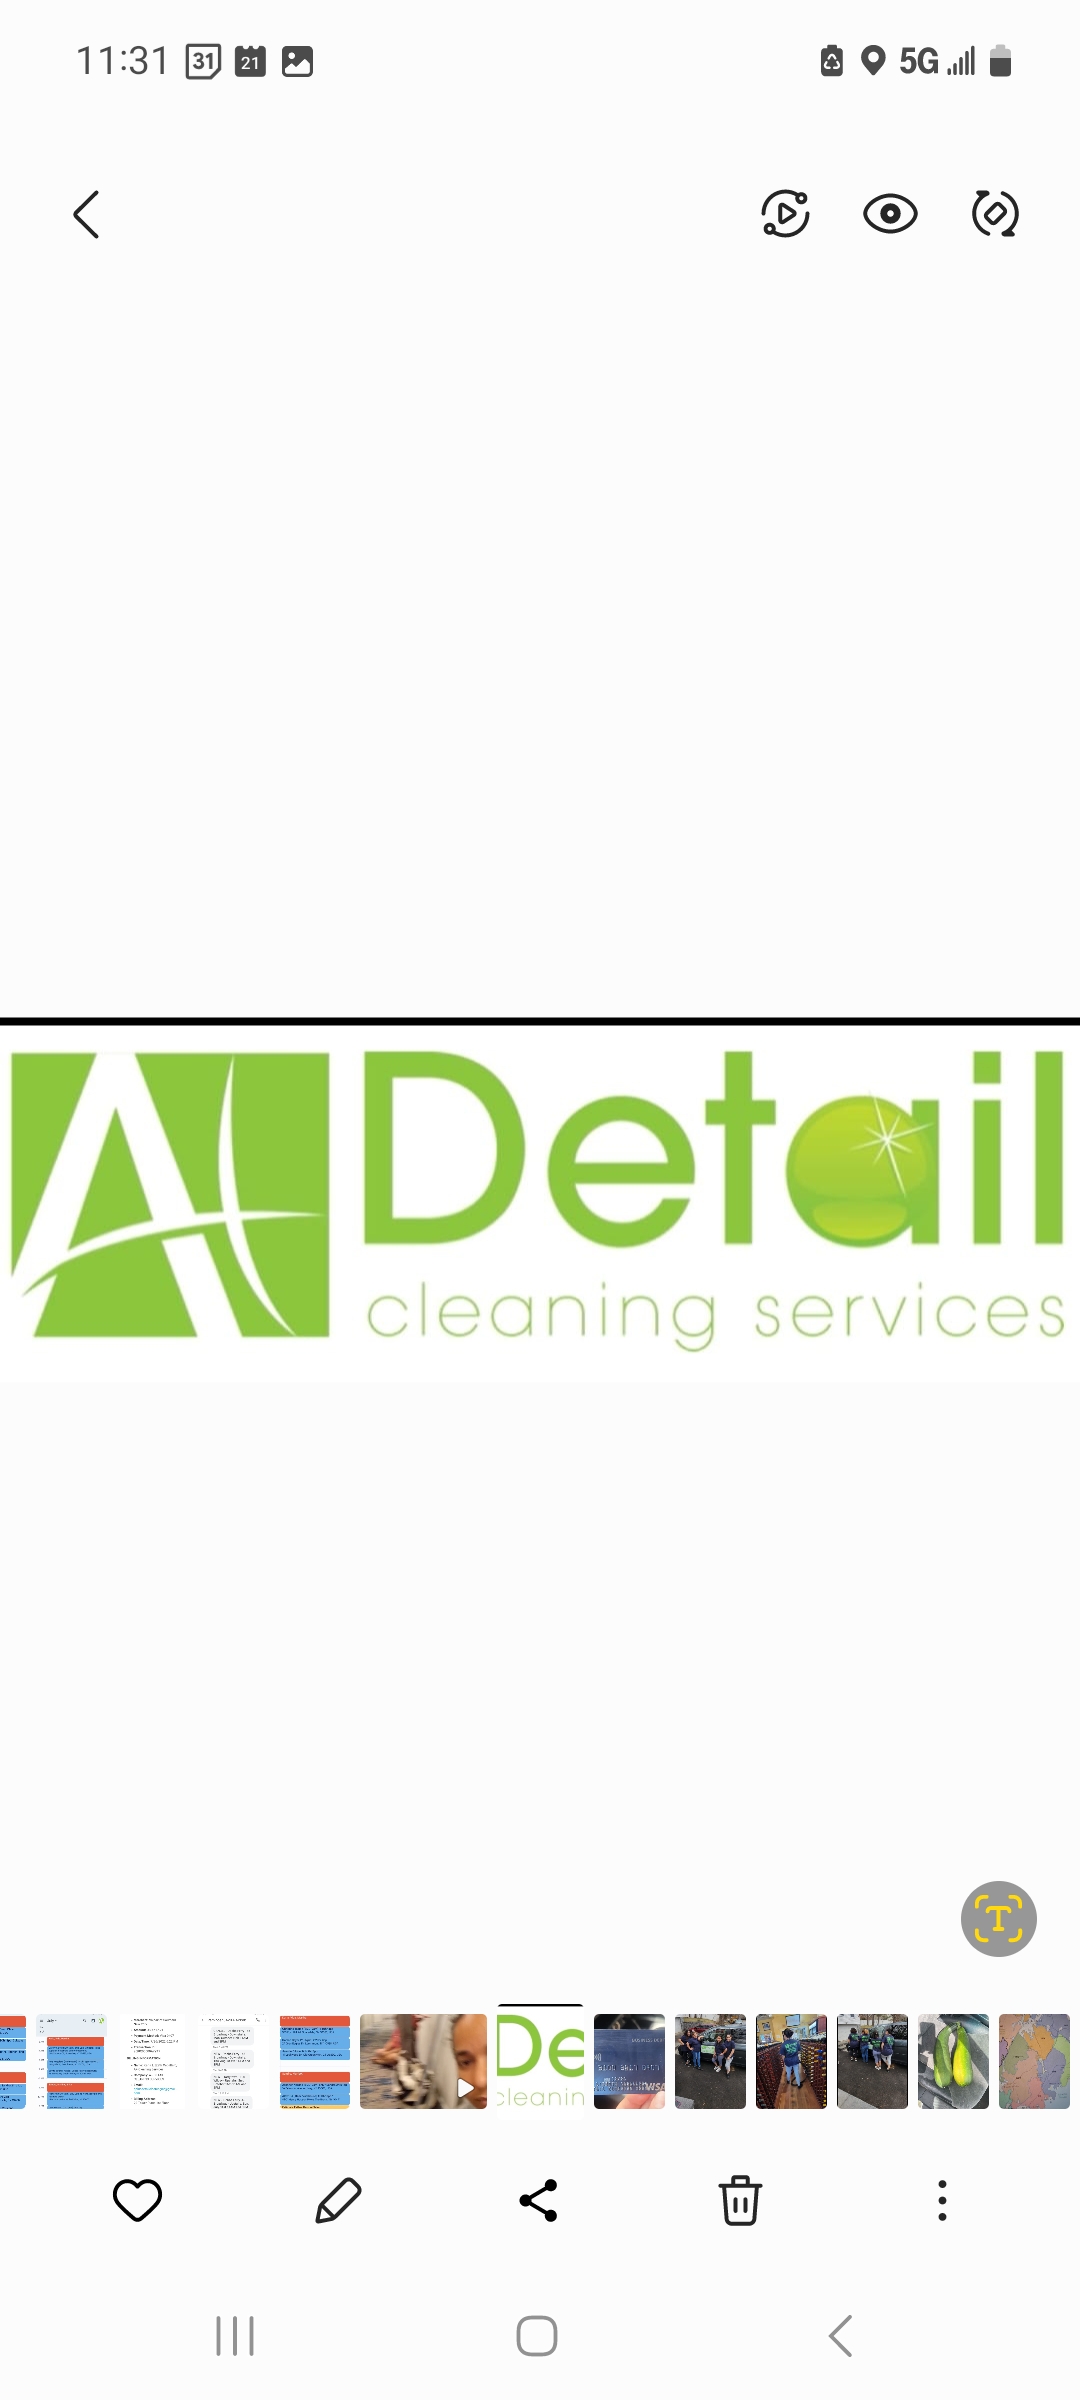 A+ Detail Cleaning Services, Inc. Logo